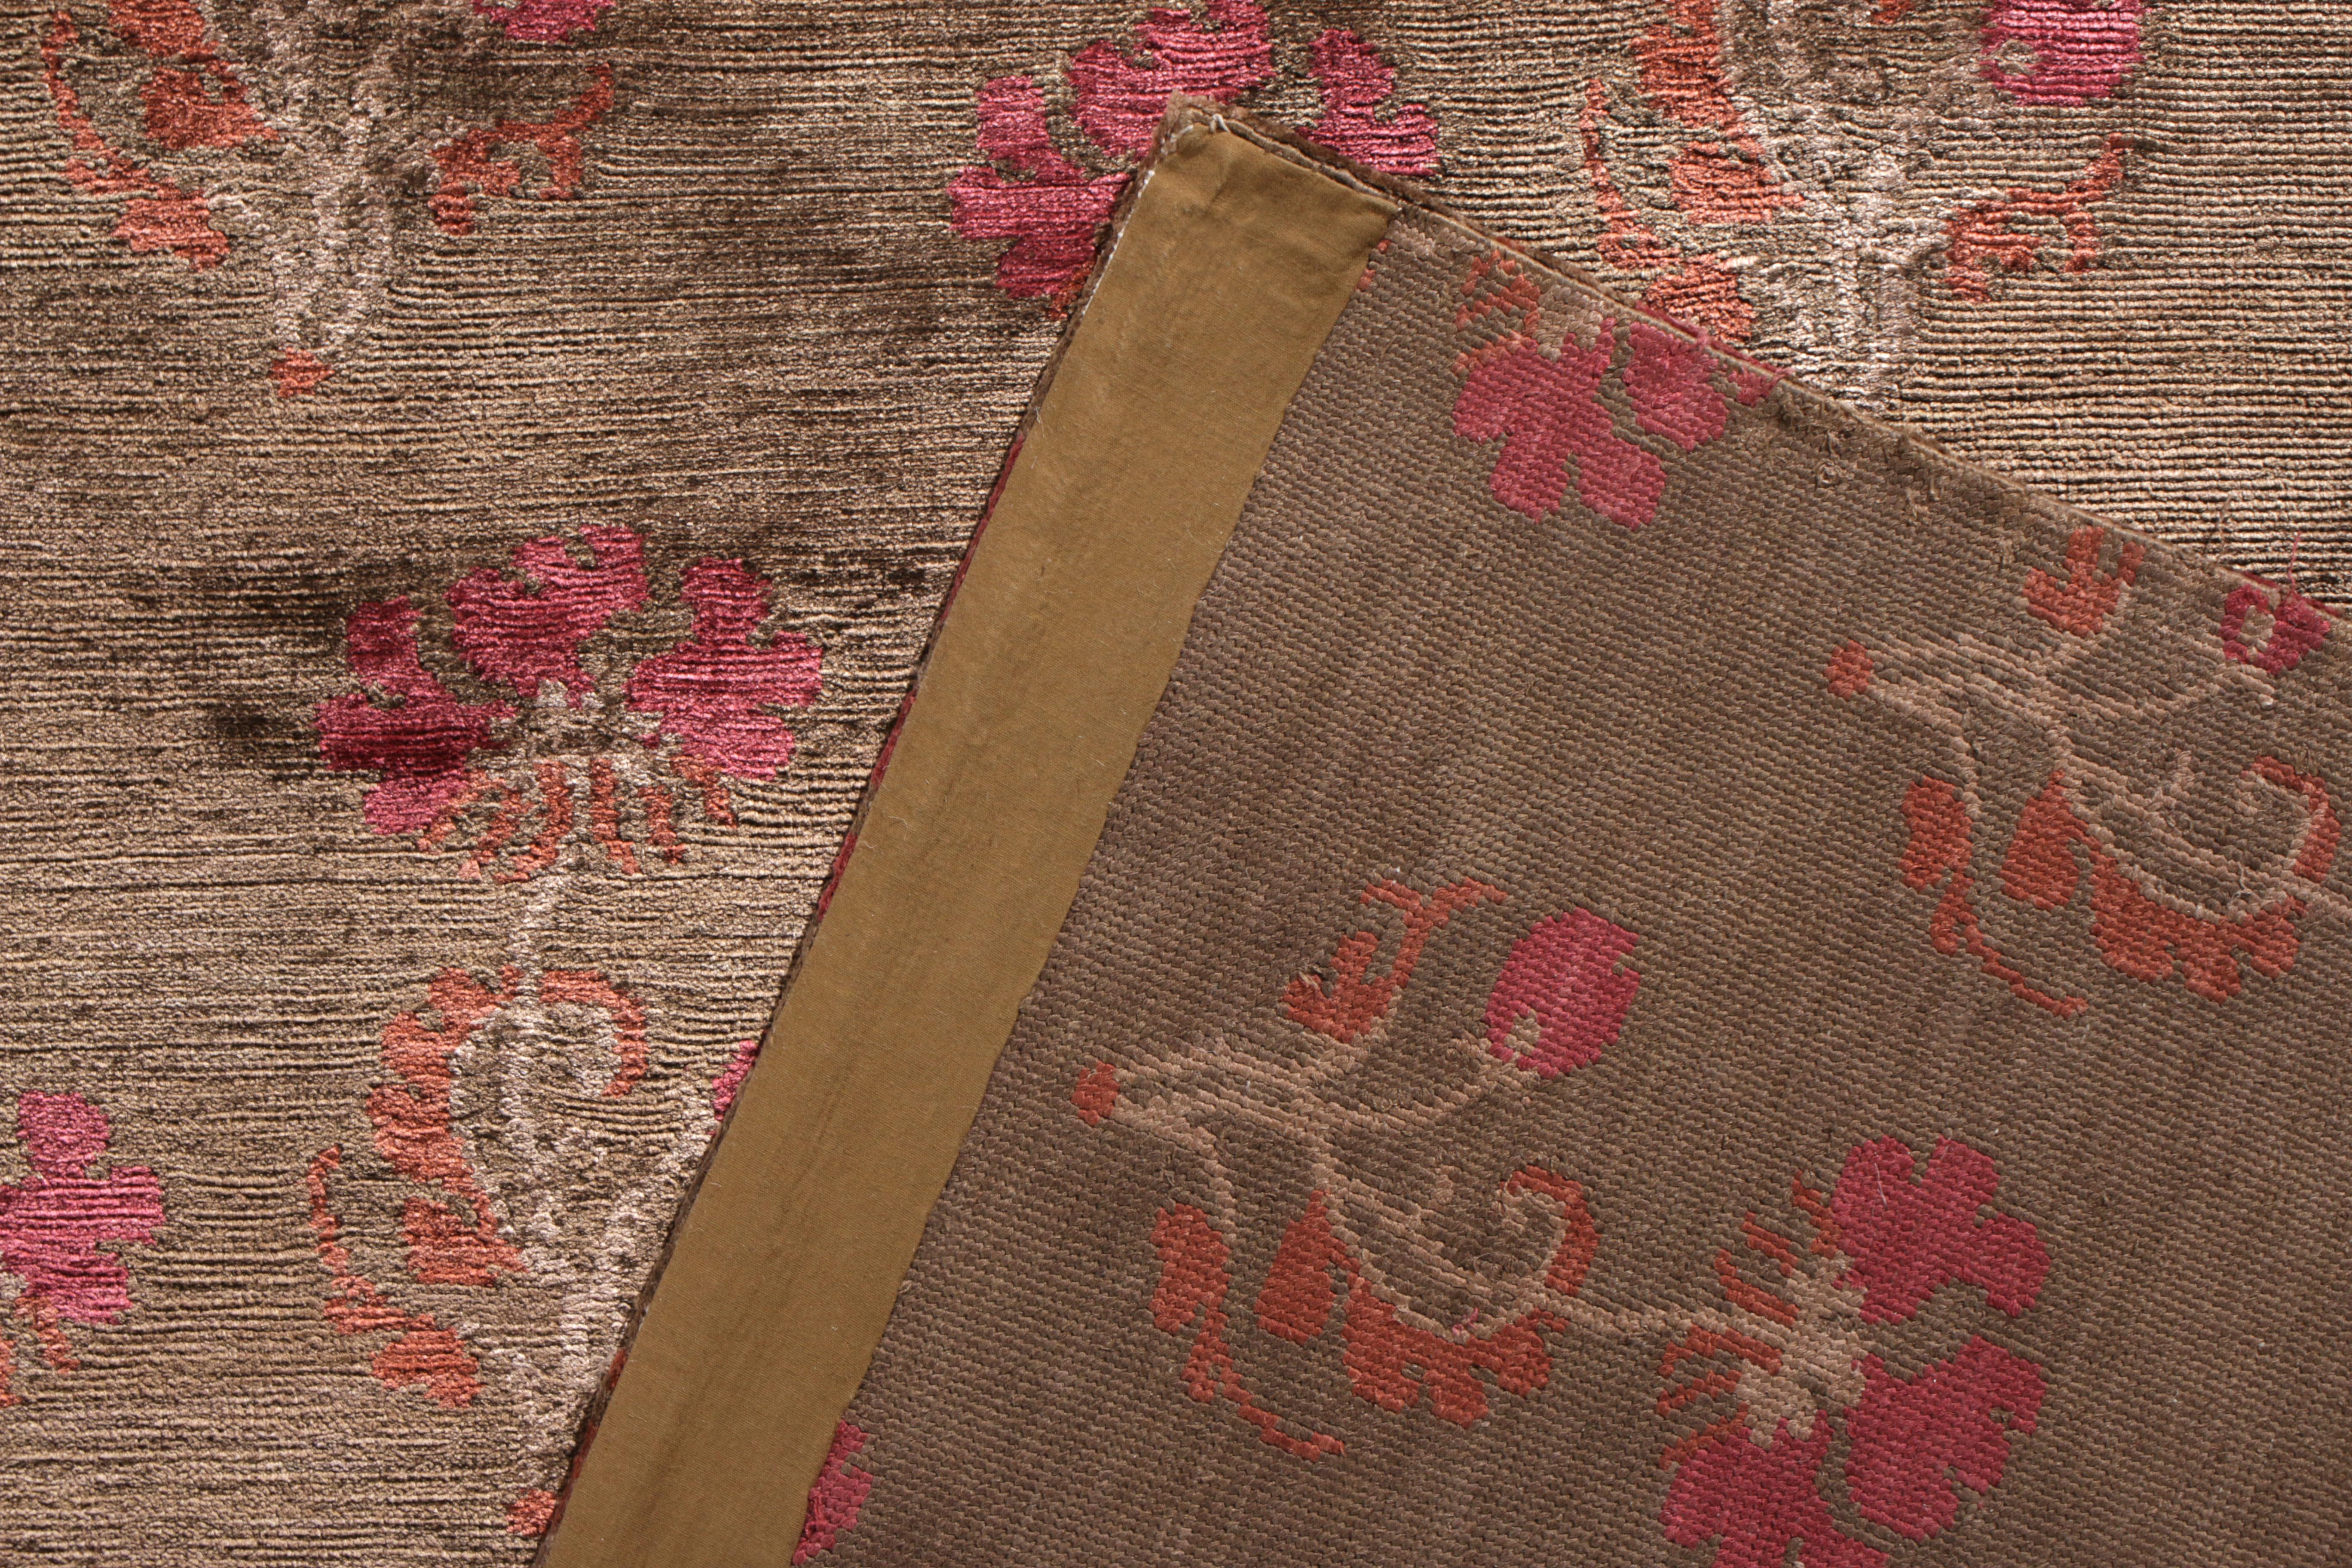 Hand-Knotted Rug & Kilim’s Handmade Transitional Rug in Brown and Pink Floral Pattern